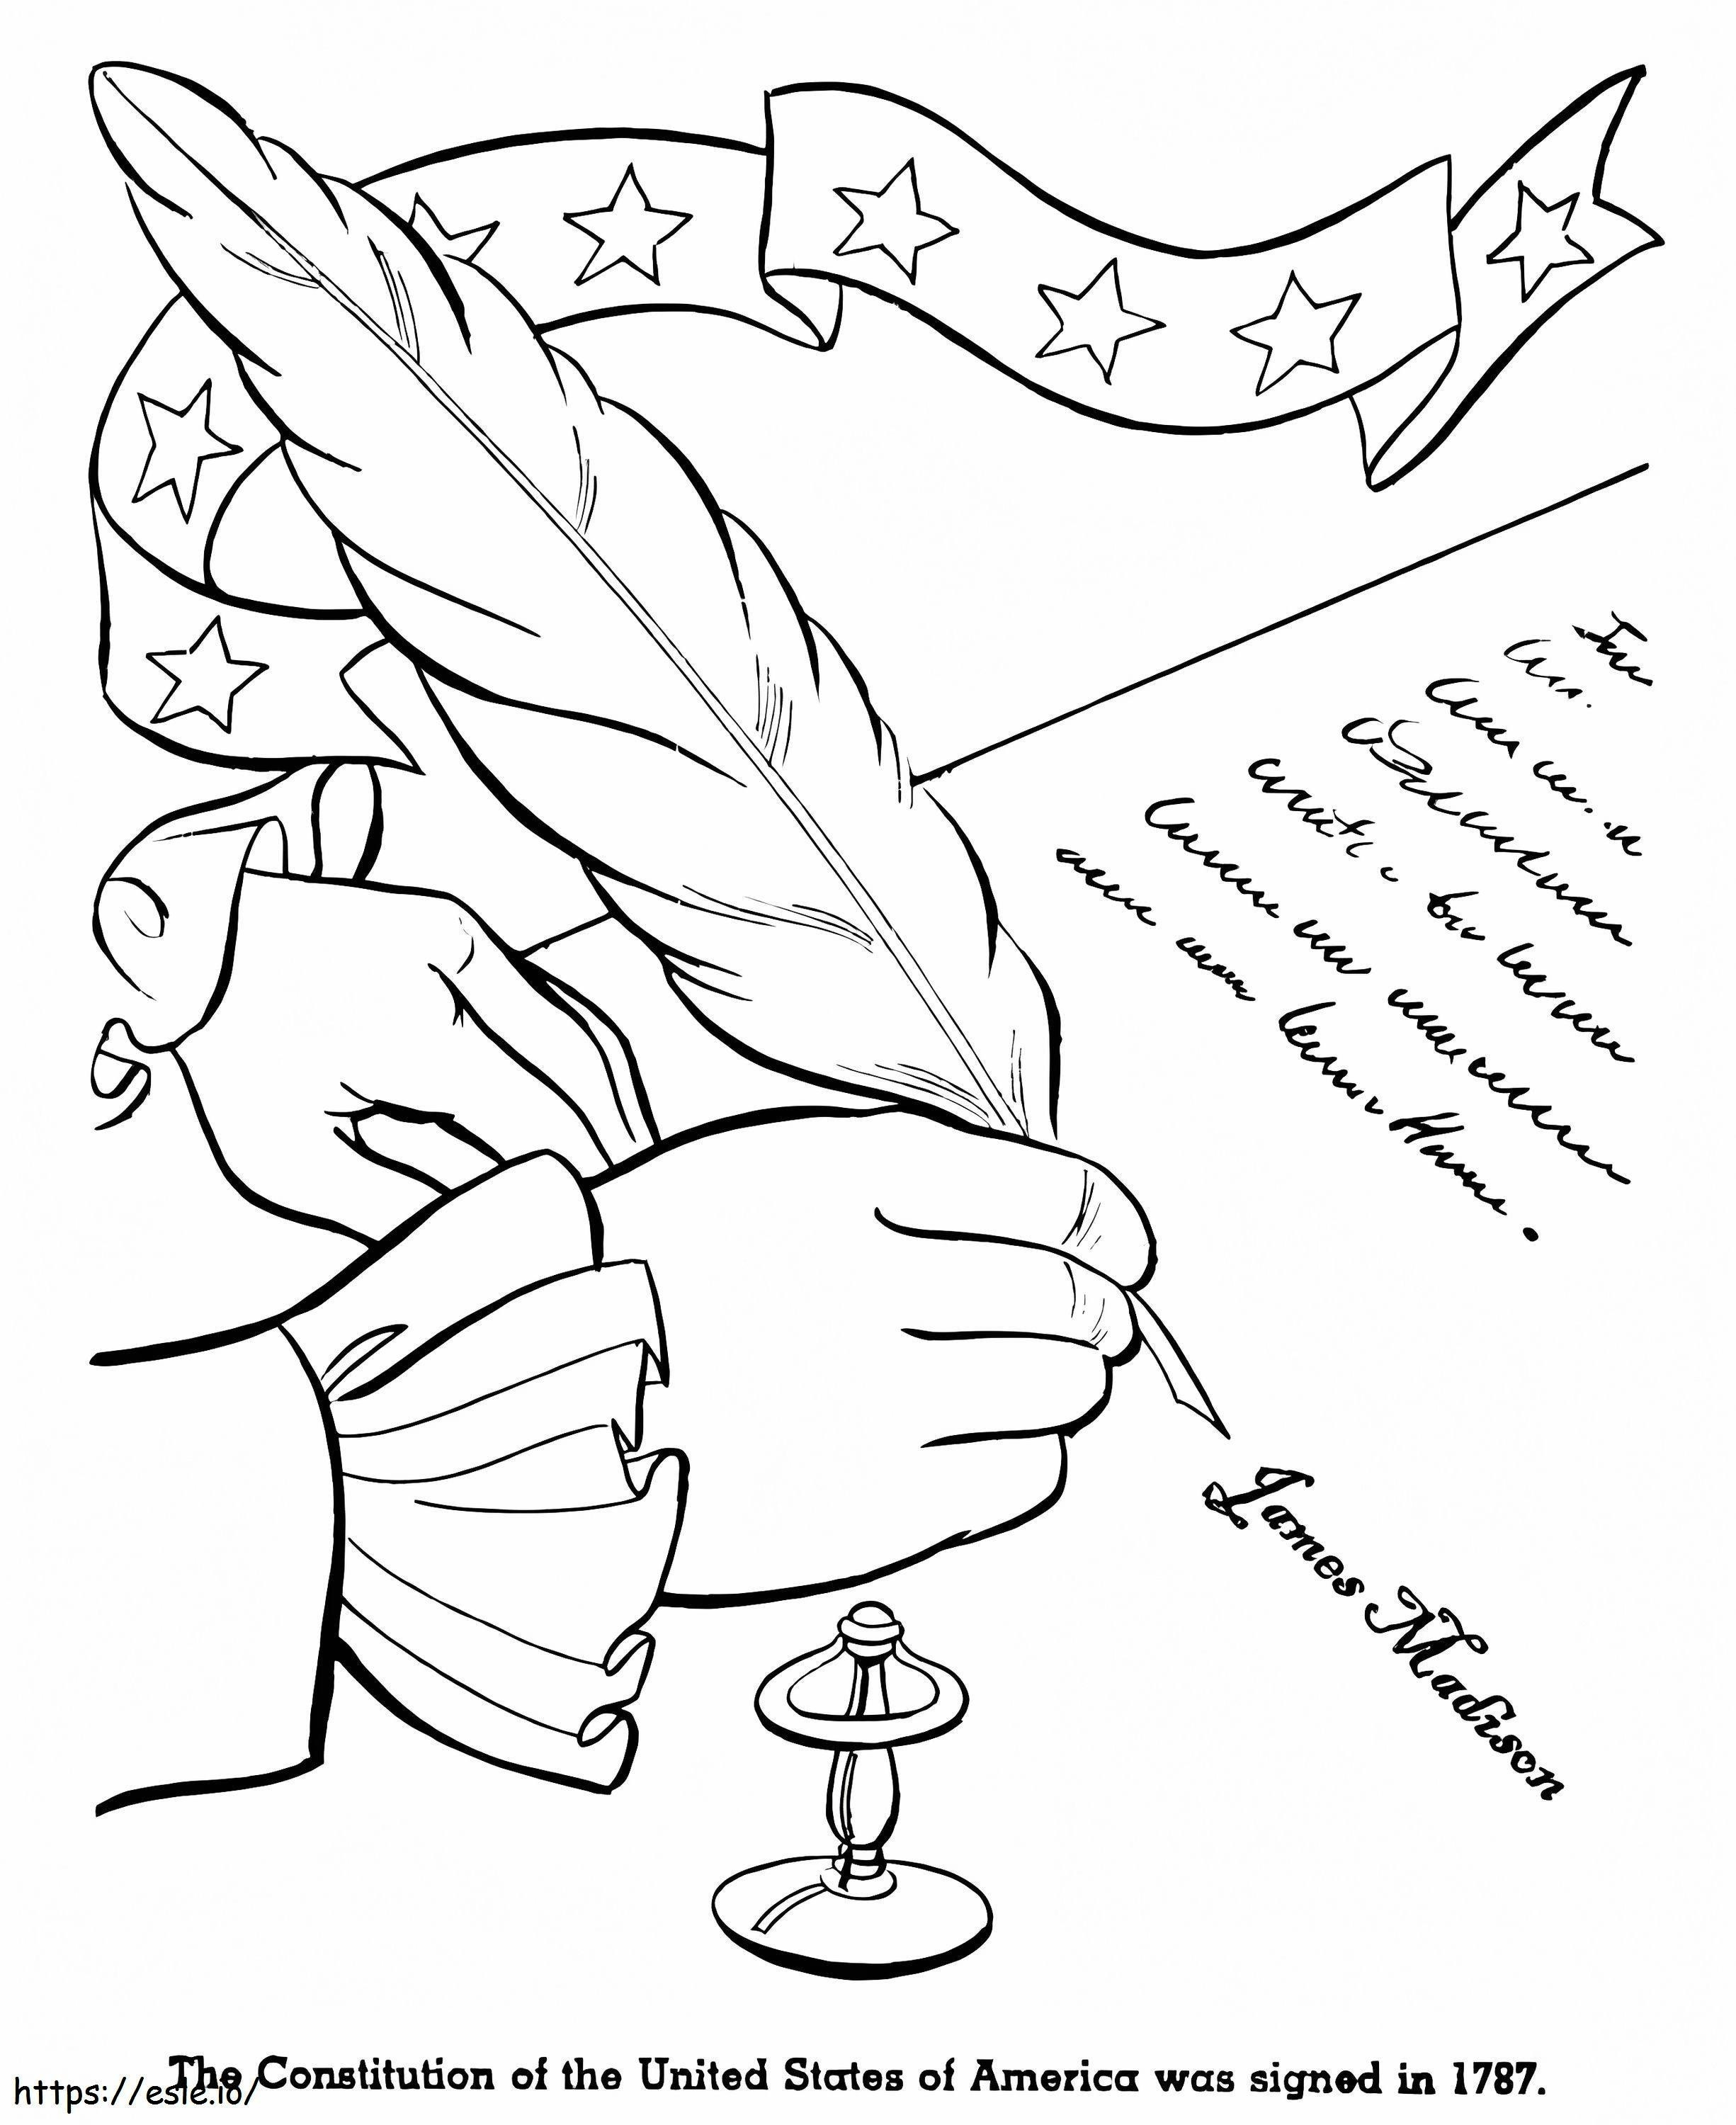 The Signing Of The US Constitution coloring page